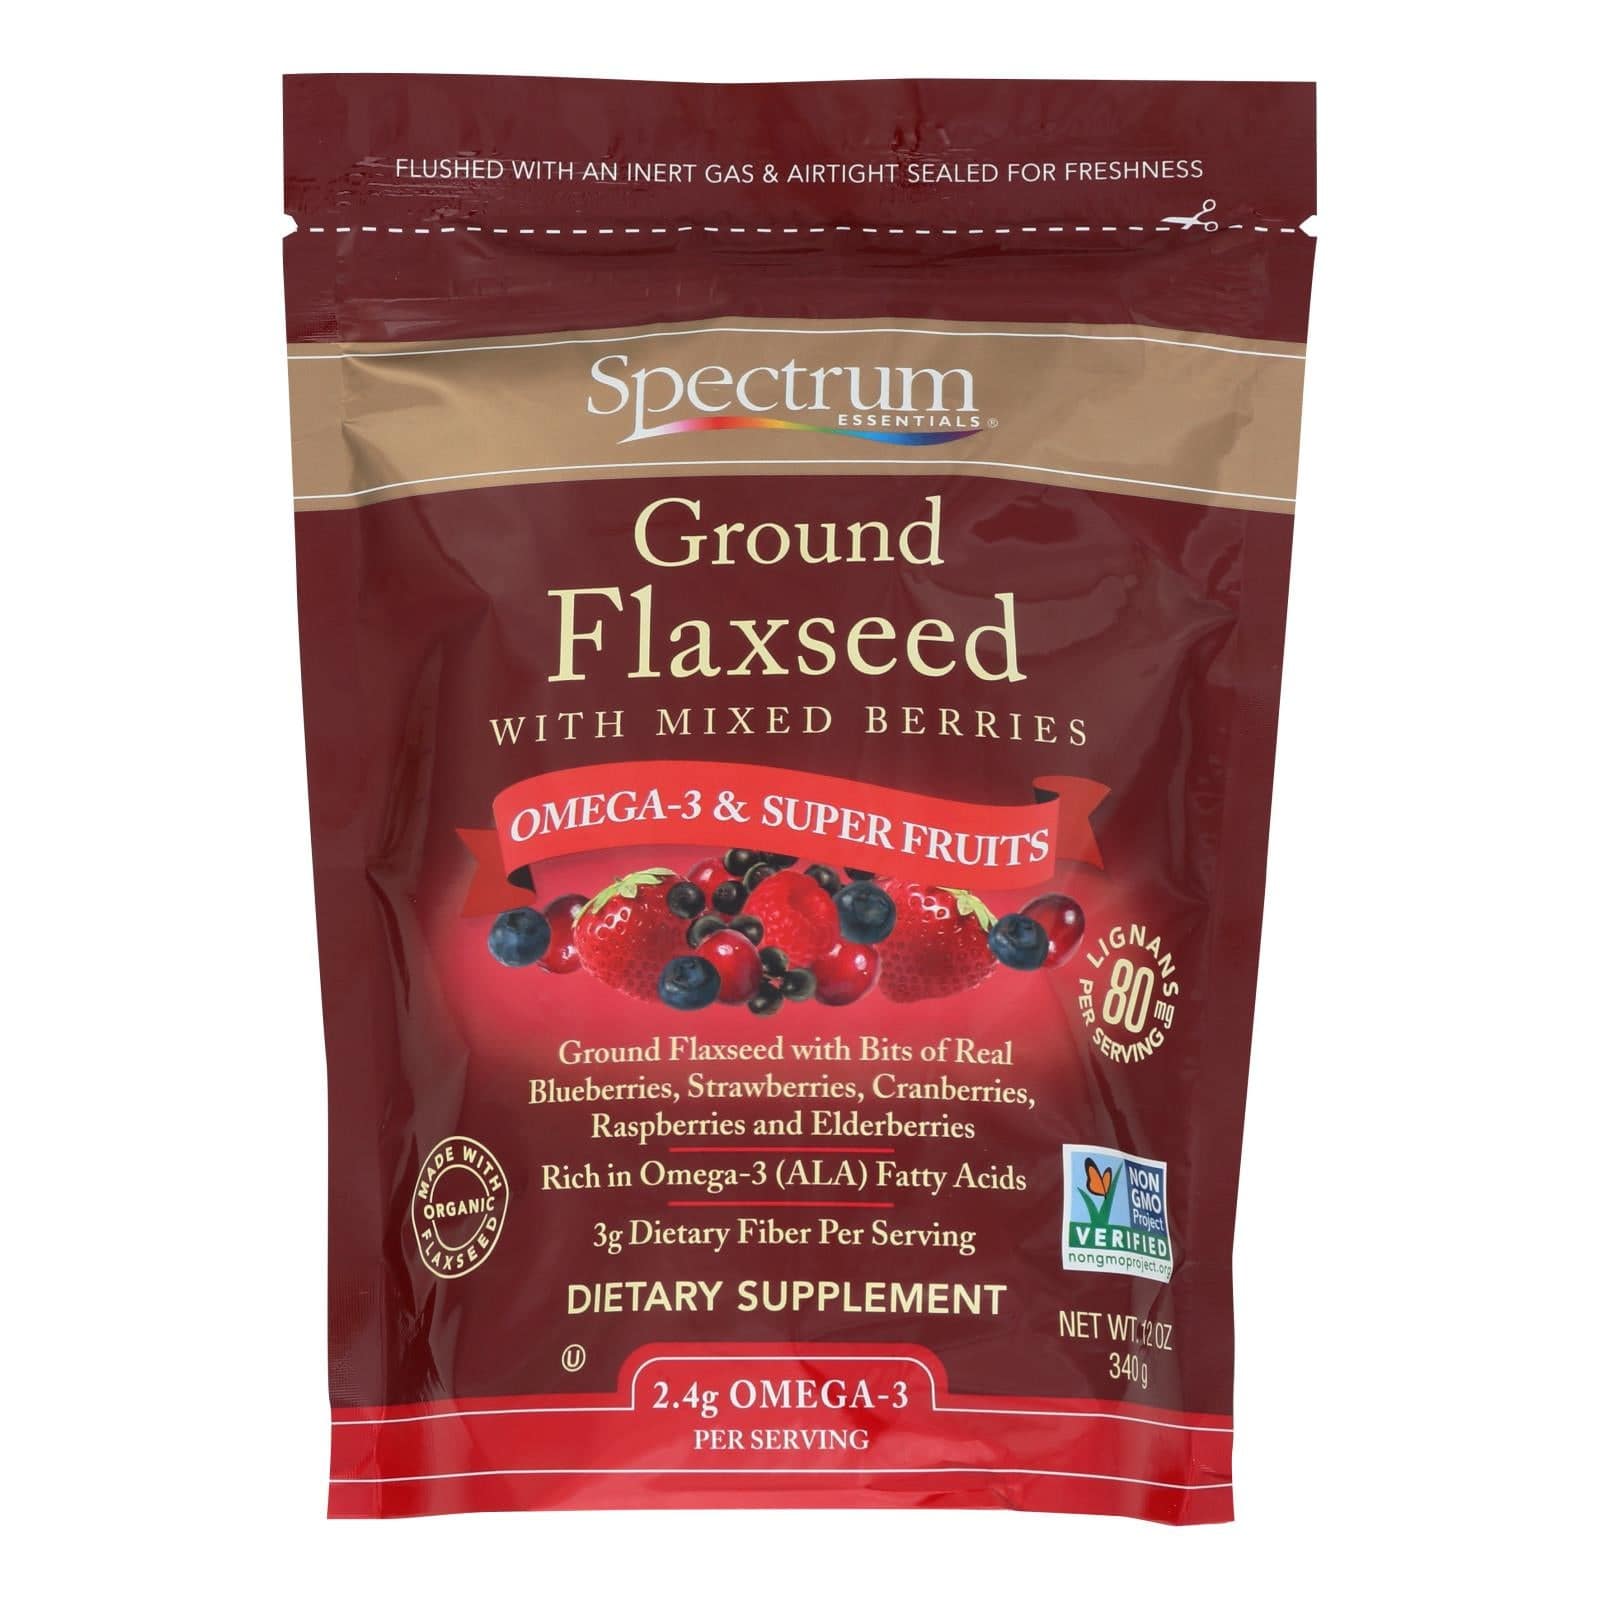 Buy Spectrum Essentials Ground Flax With Mixed Berries - 12 Oz  at OnlyNaturals.us